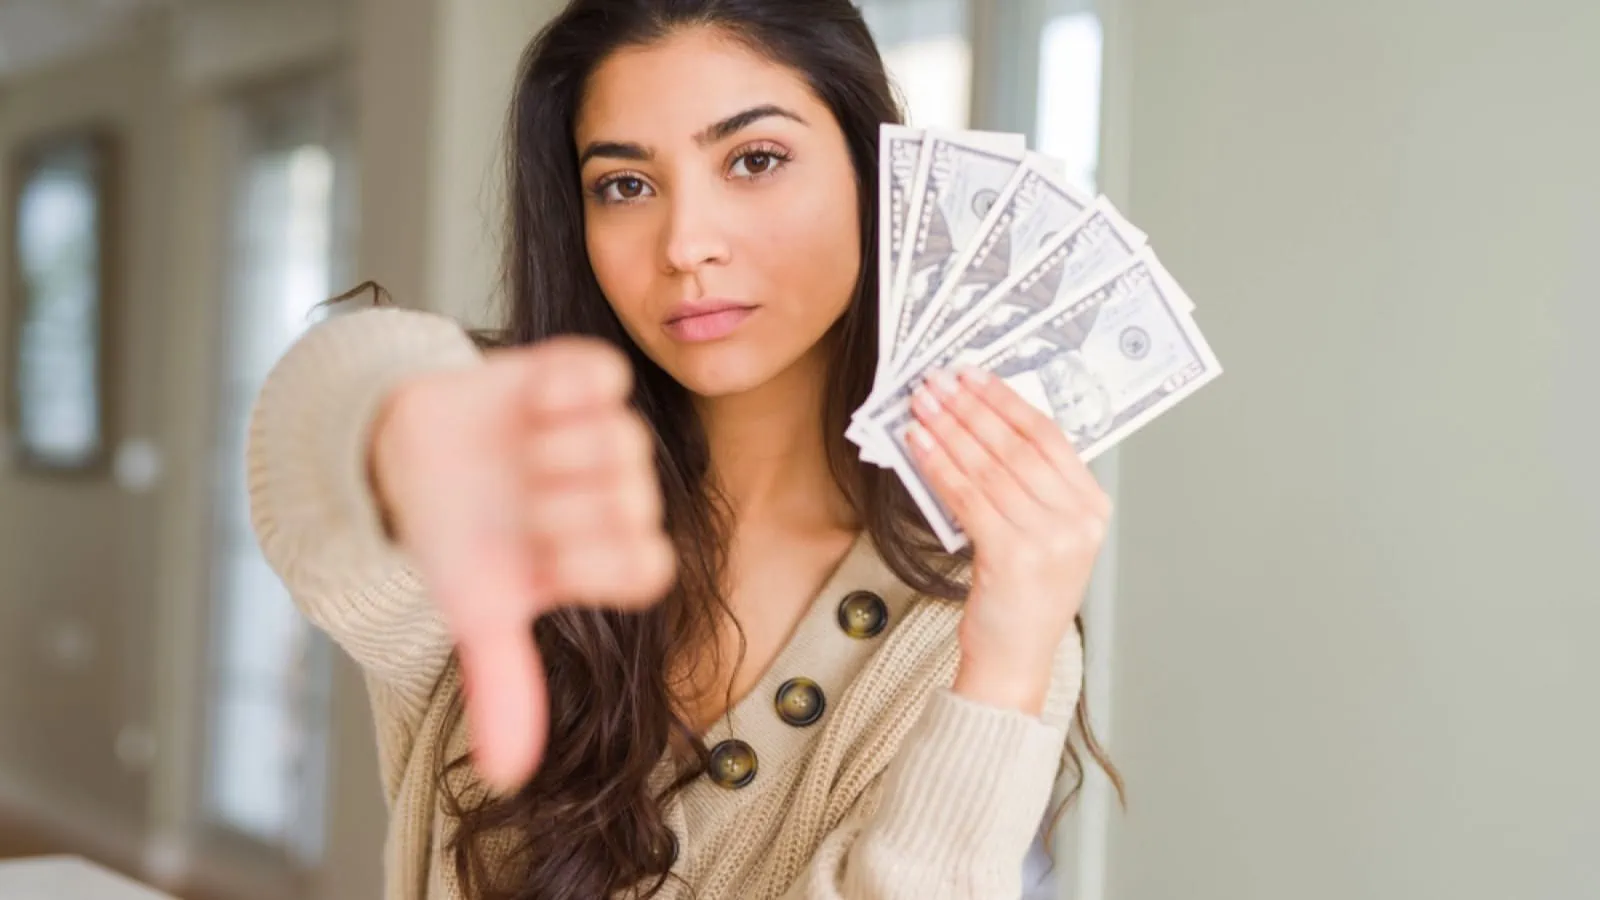 Woman with money showing thumbs down